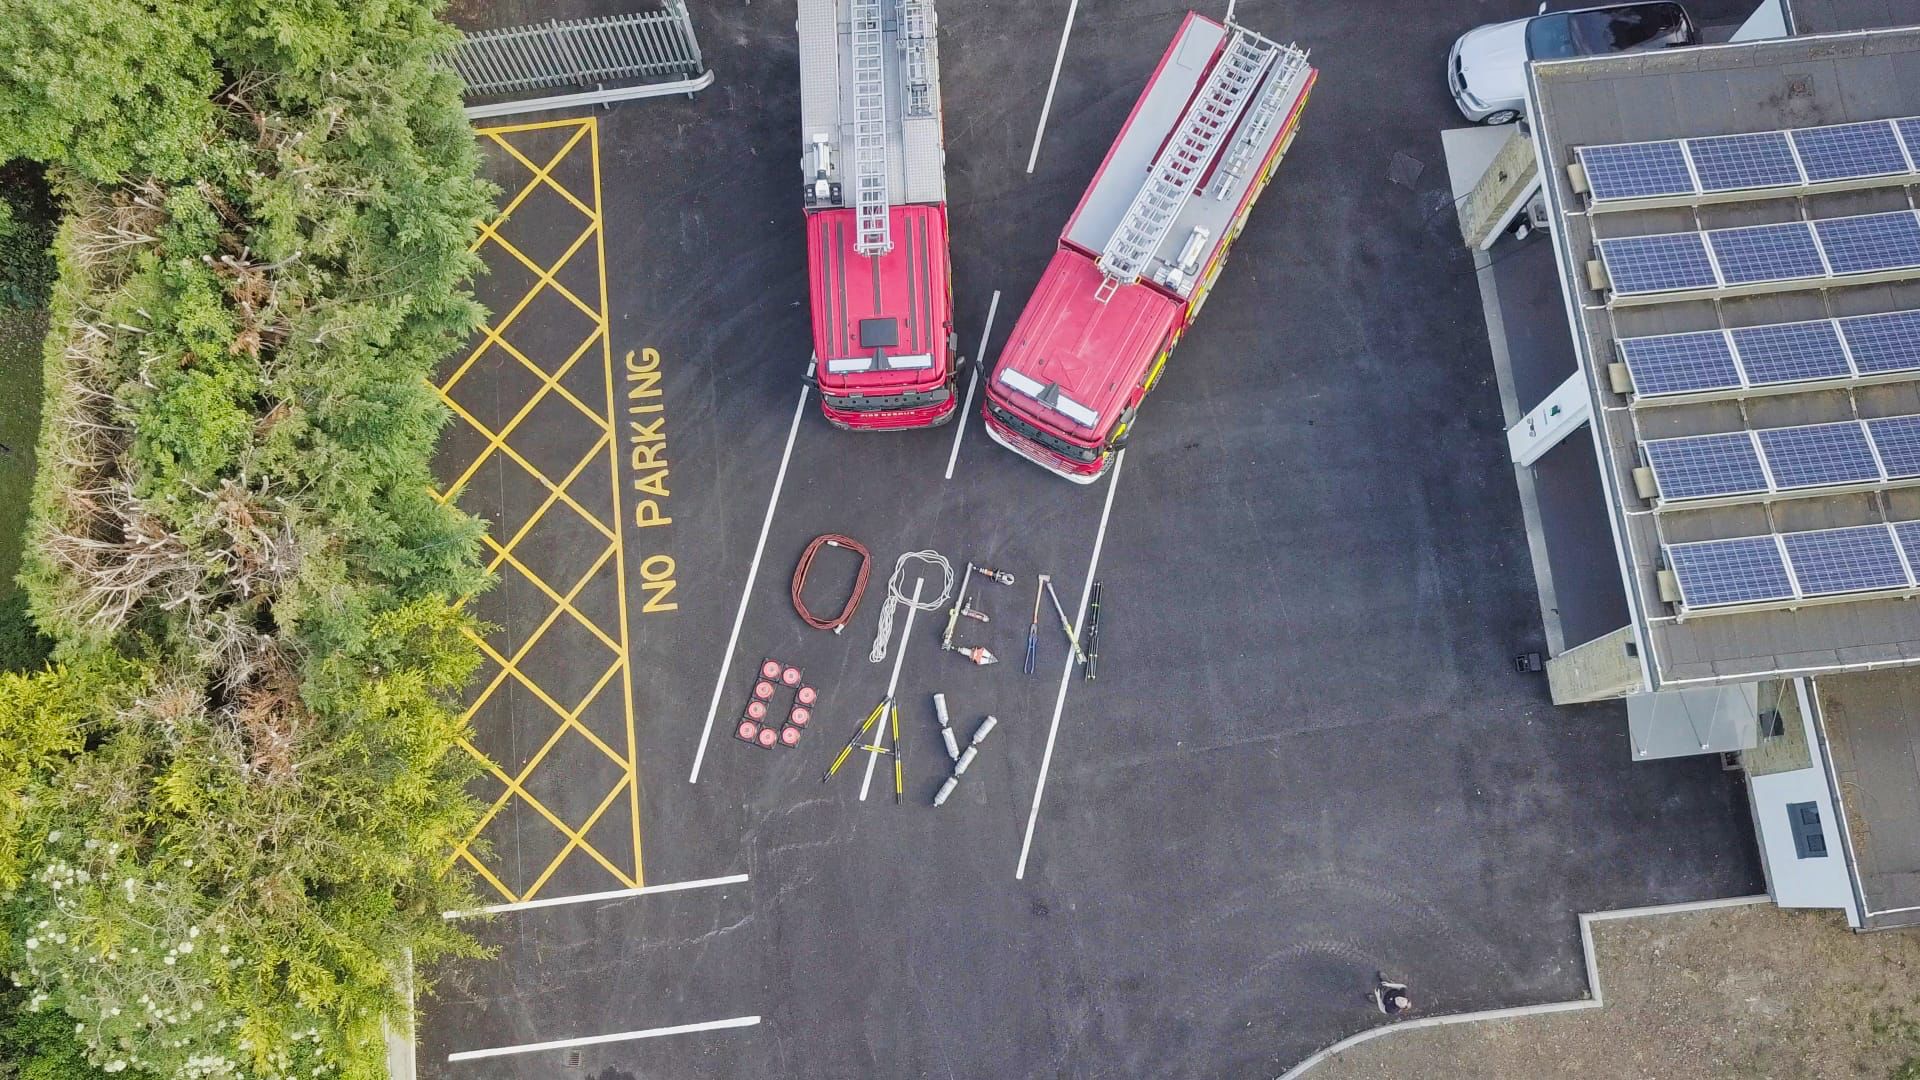 An aerial shot of two fire engines and the words "Open Day"